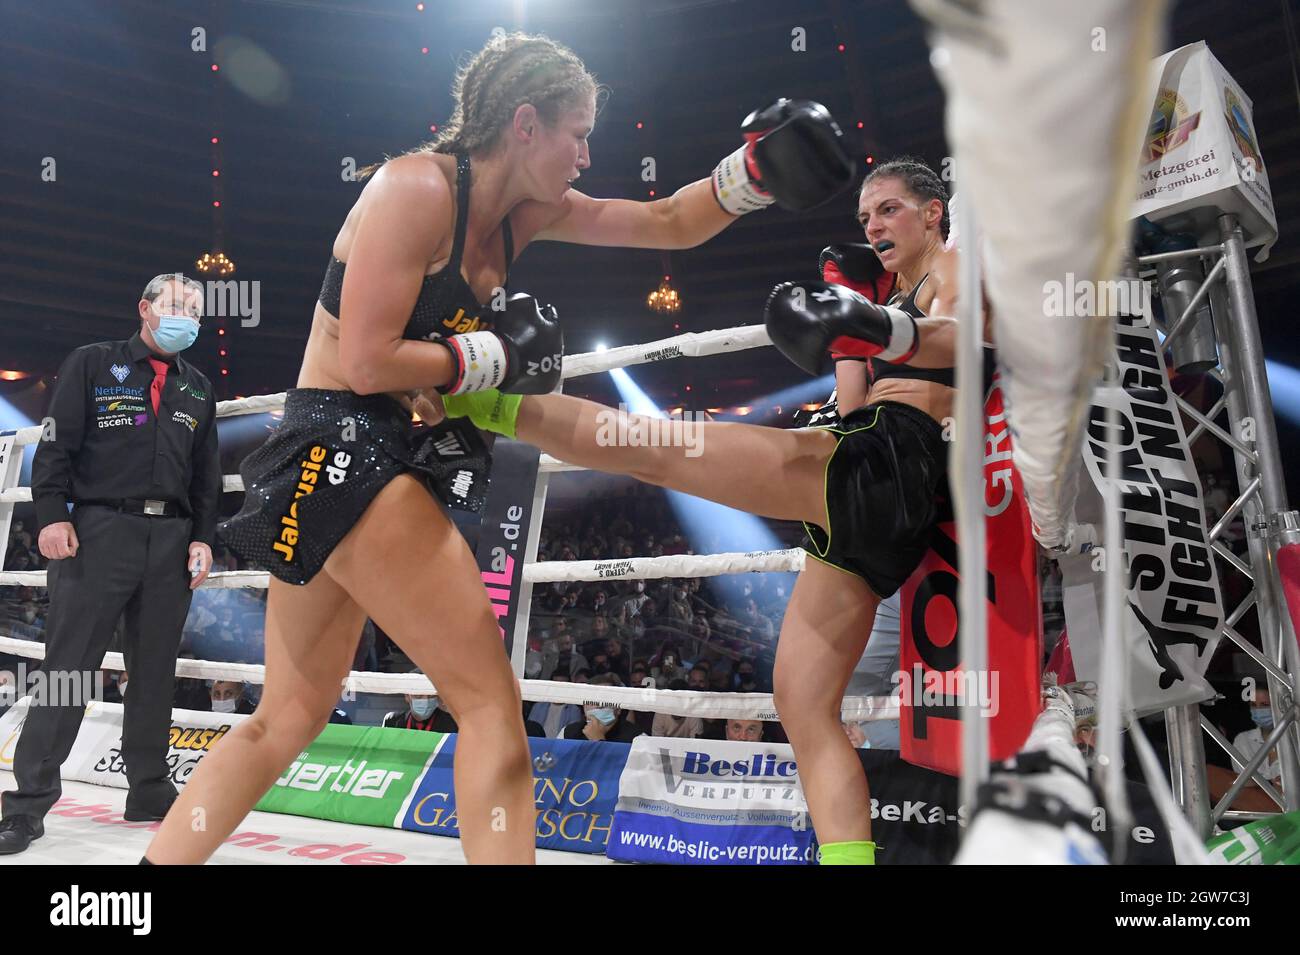 Munich, Germany. 02nd Oct, 2021. The kickboxers Marie Lang (l) and Ilda  Lelo fight in the Circus Krone Bau at Stekos Fight Night for the WKU World  Championship Kickboxing Lowkick. Lang won